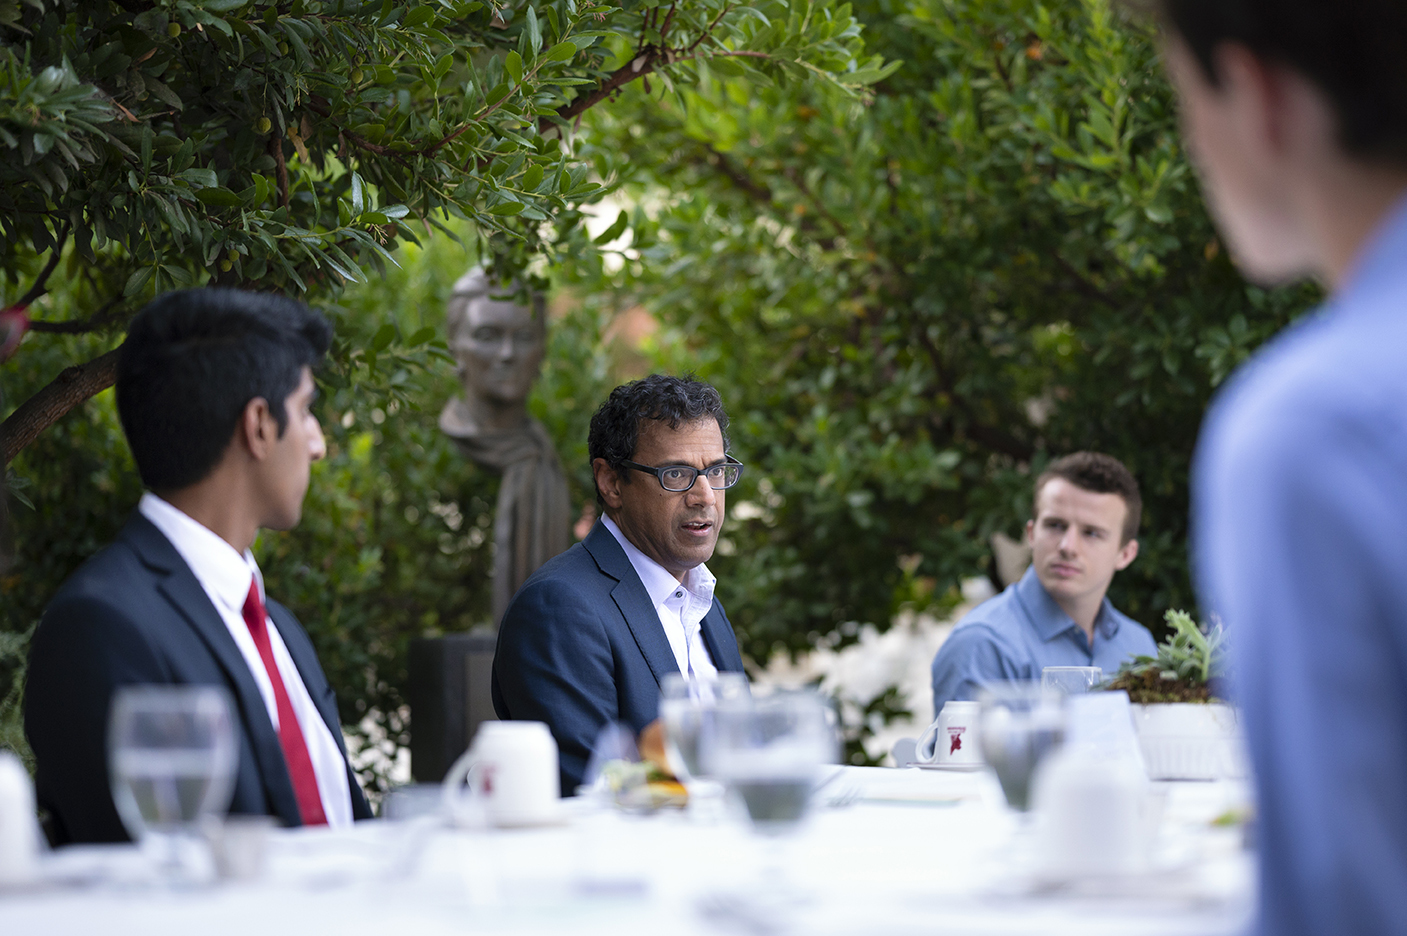 Dr. Atul Gawande sits at the outdoor Ath dinner head table with students surrounding him in conversation.